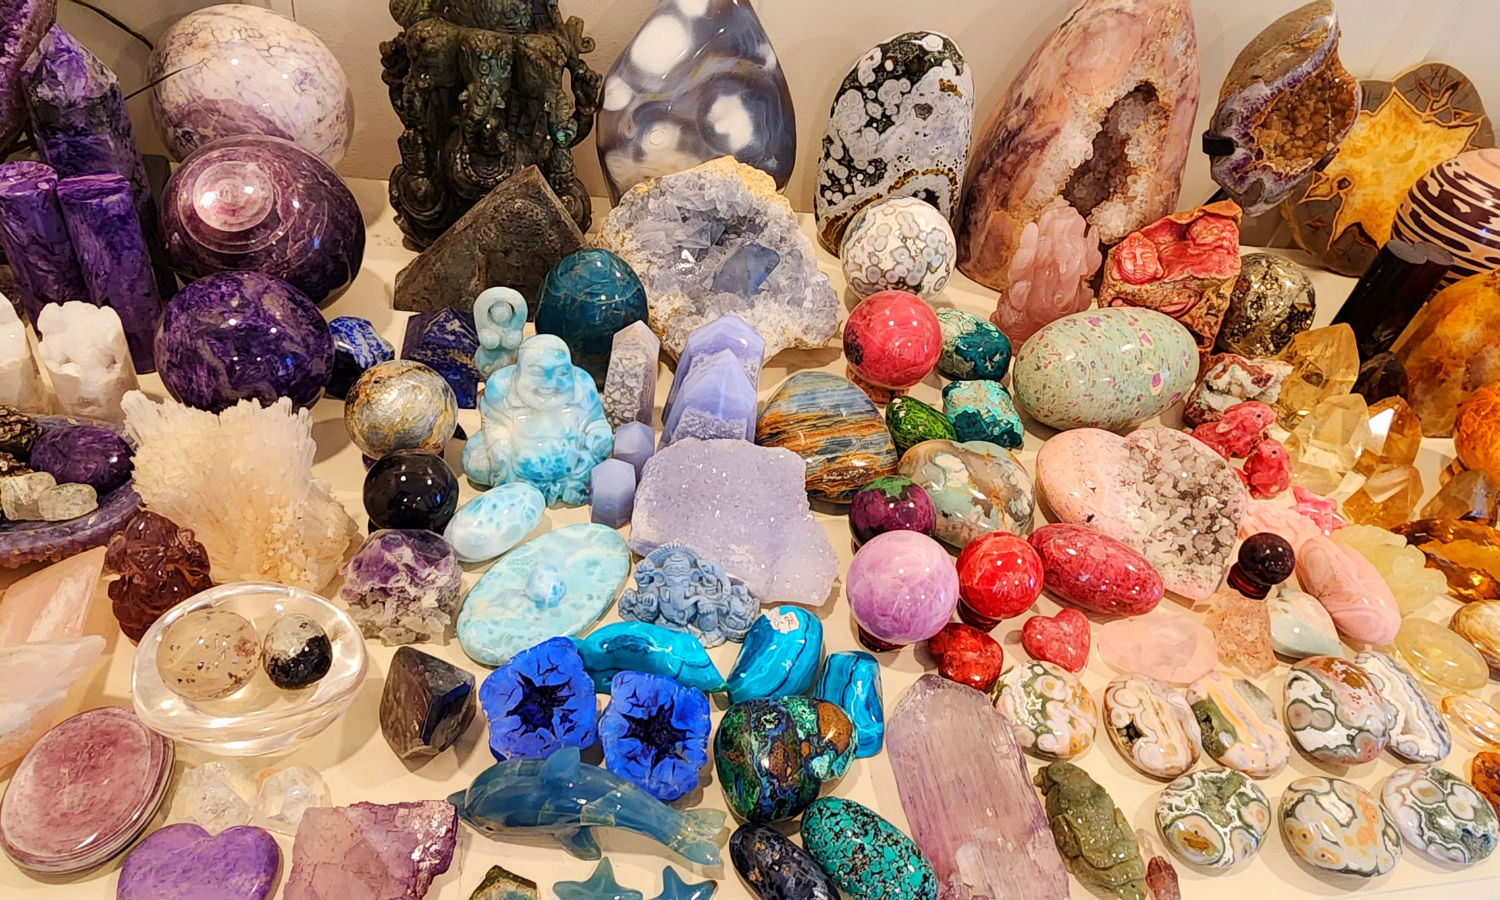 Crystals and Stones